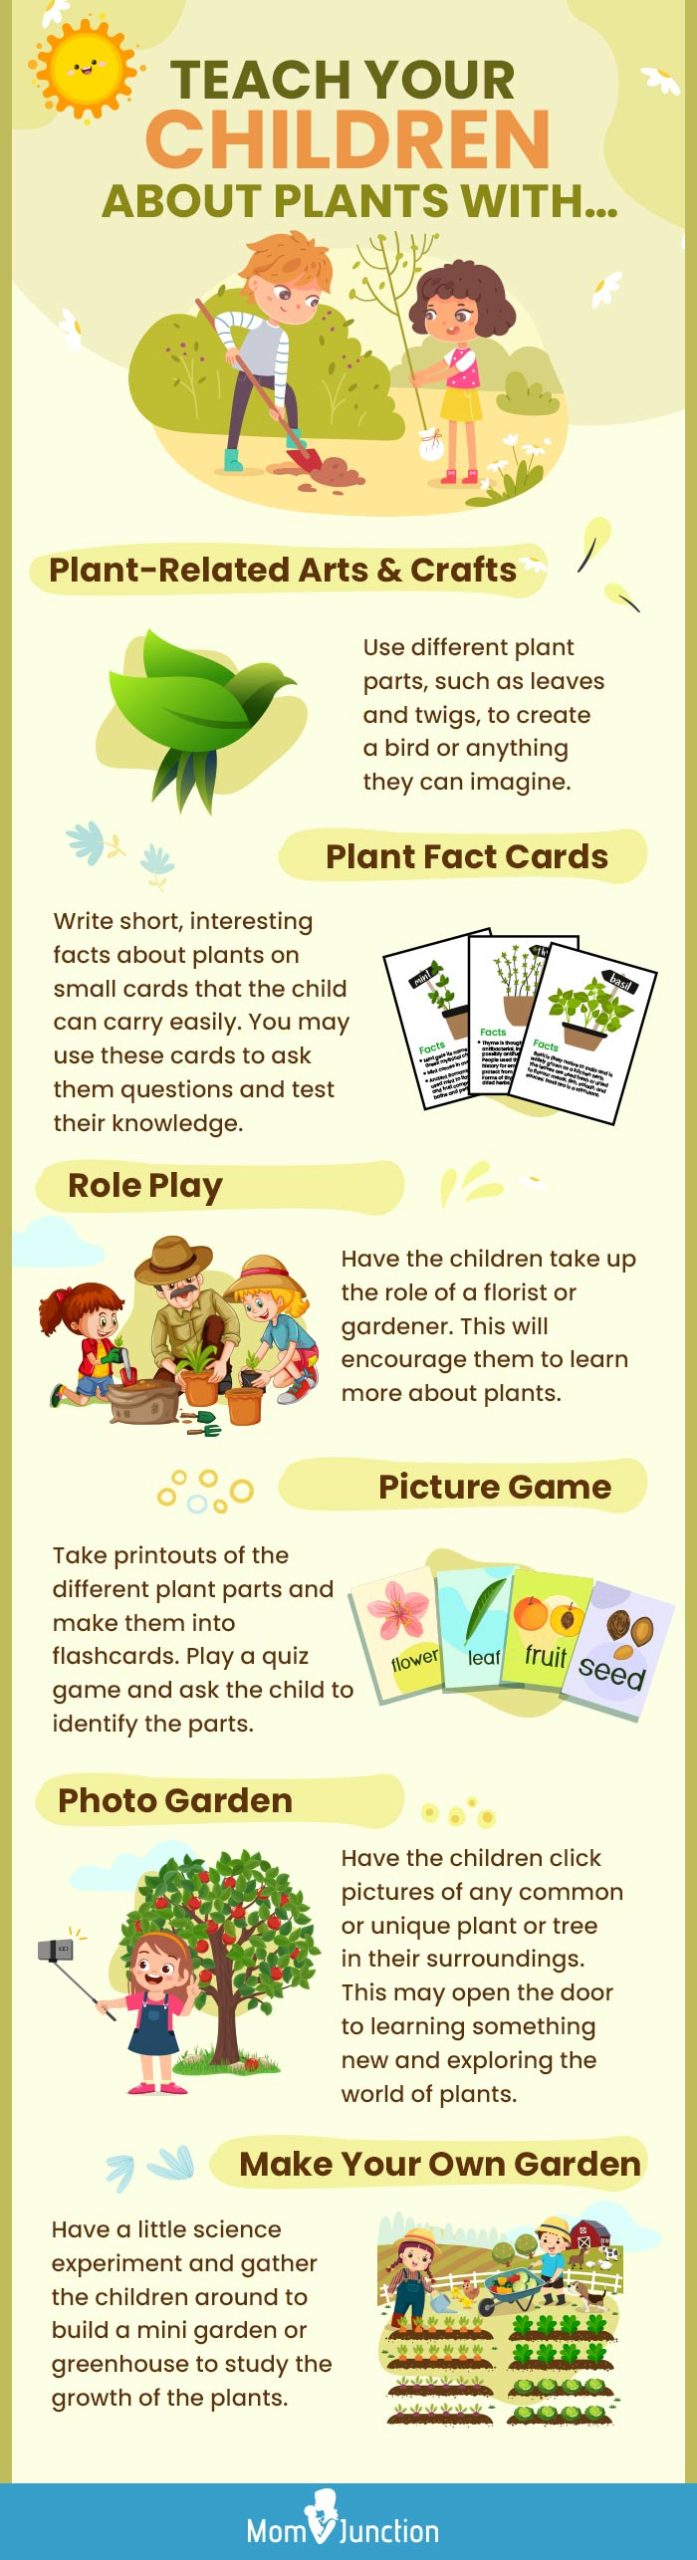 teach your children about plants [infographic]